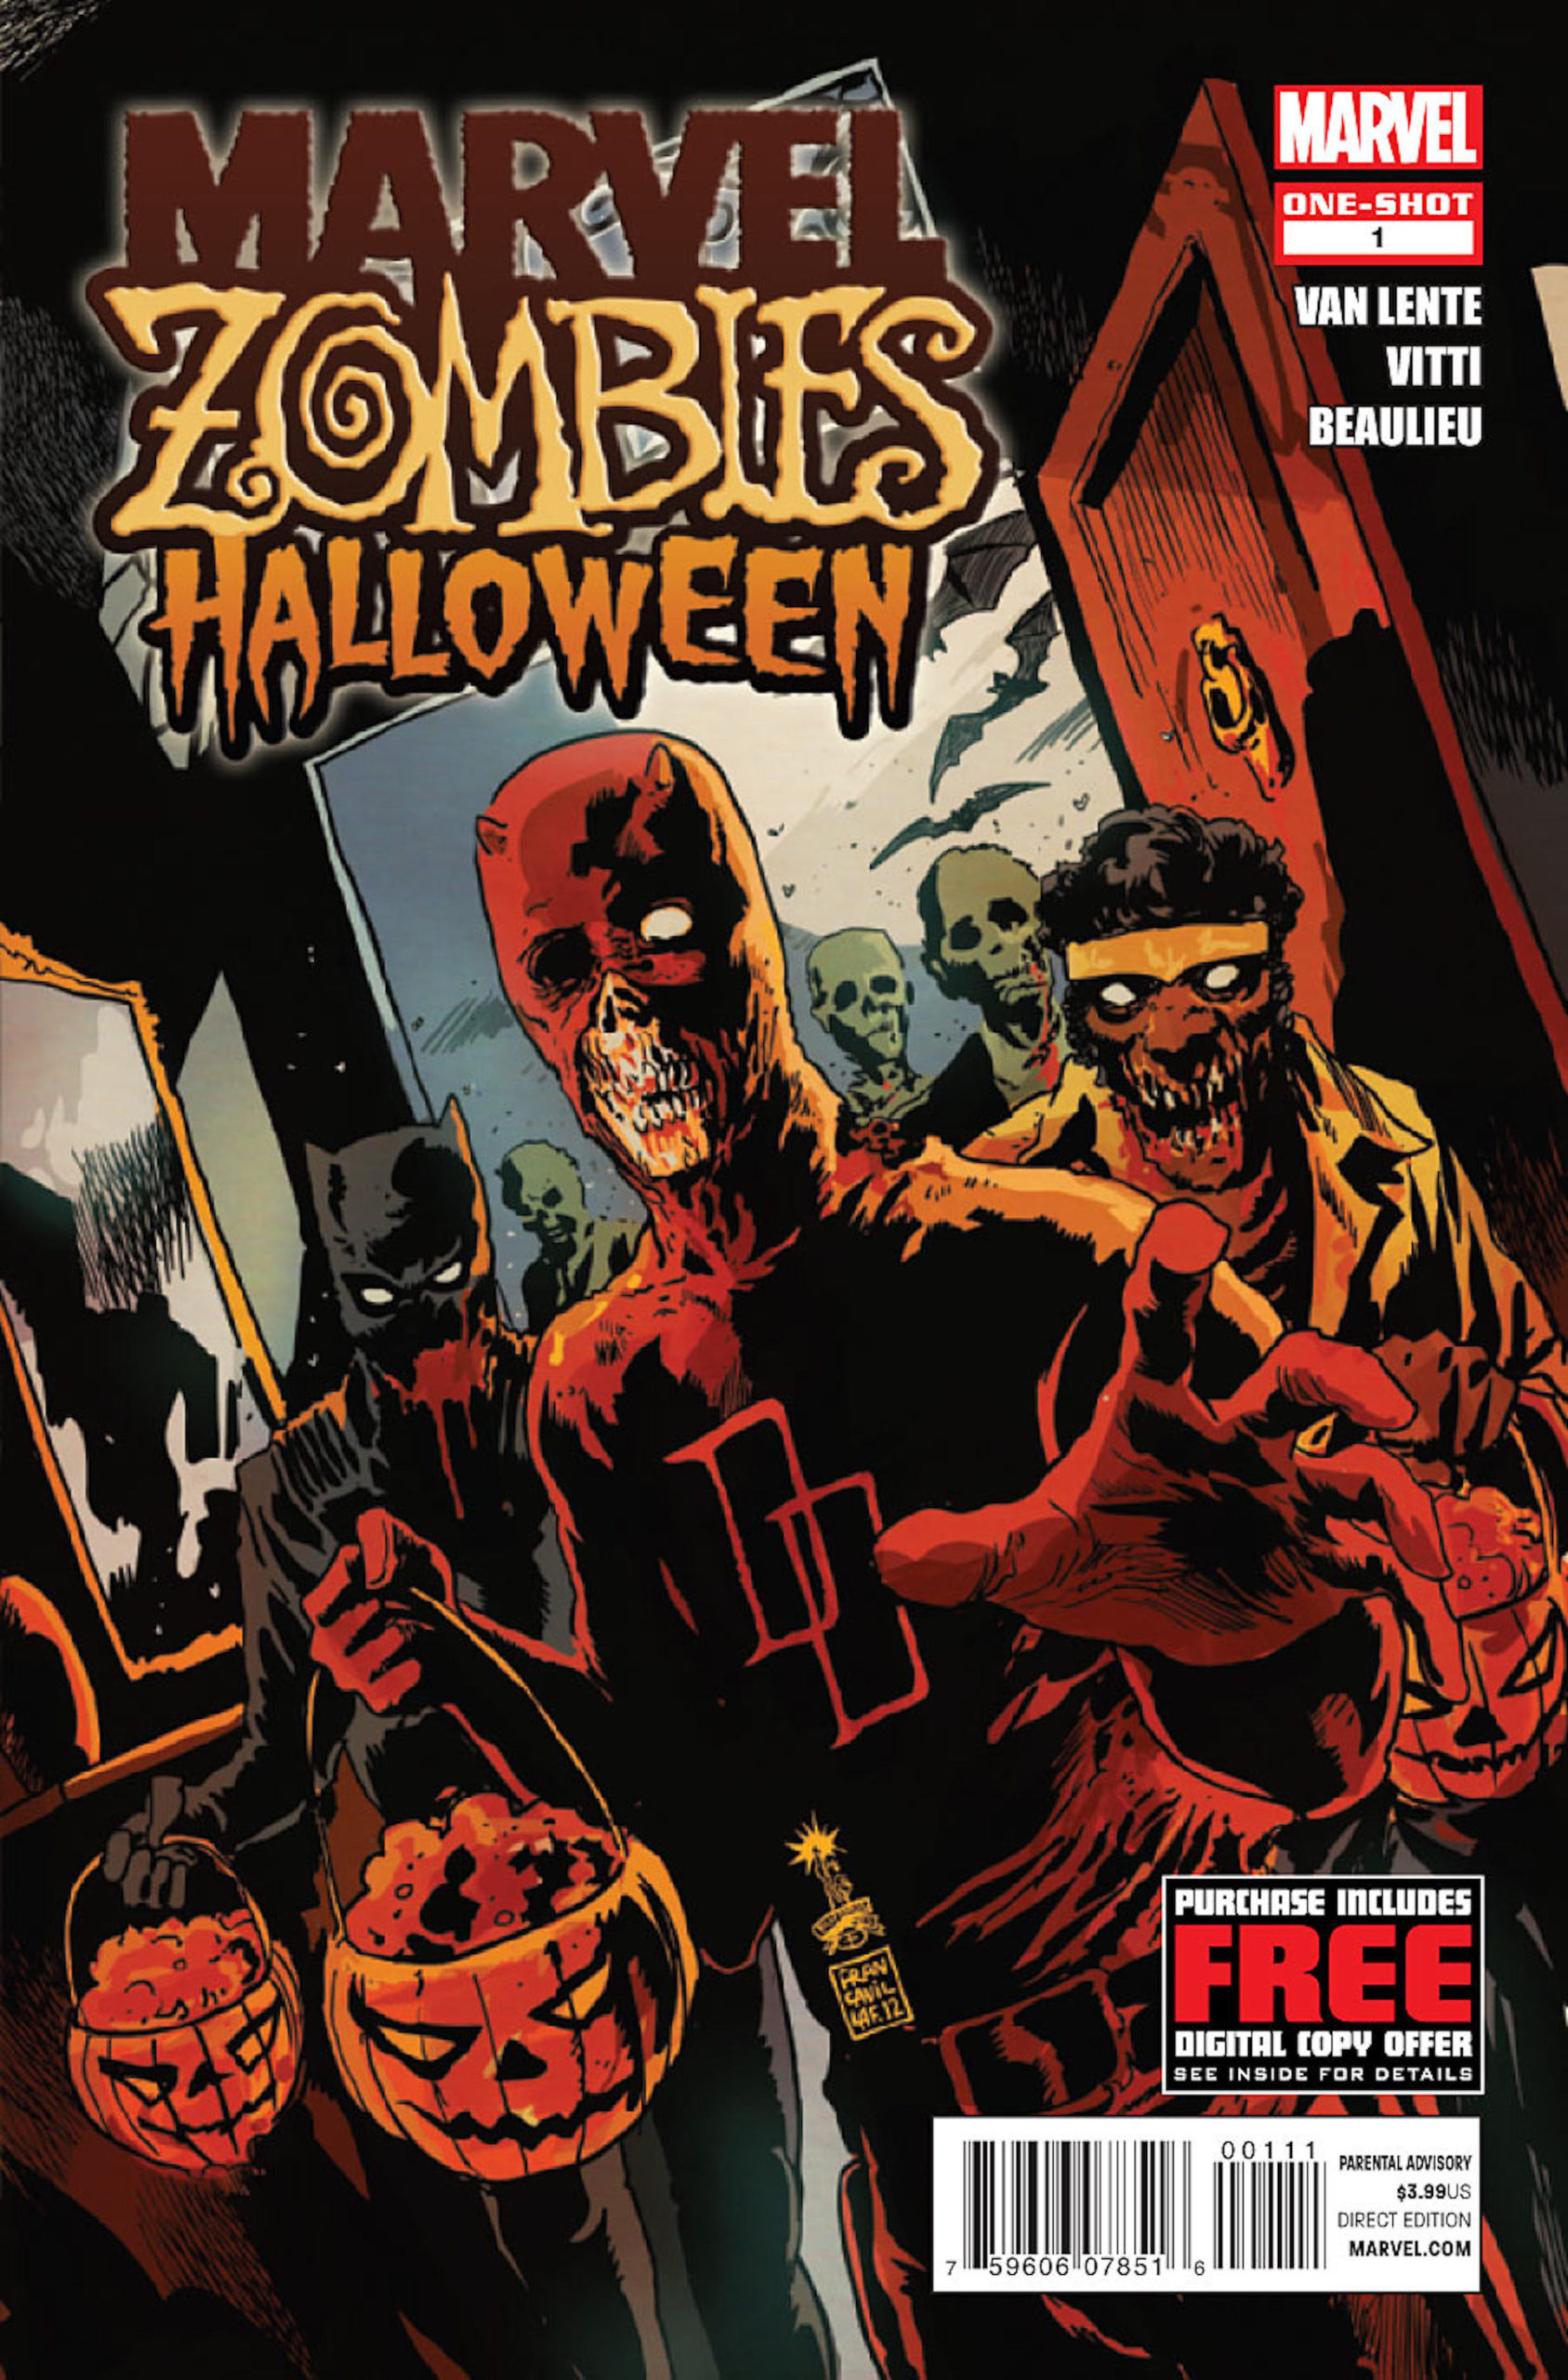 This image is the cover of the spooky comic book; Marvel Zombies Halloween Vol 1 #1 (2012), where Daredevil can be seen leading a pack of trick or treating zombie superheroes. 